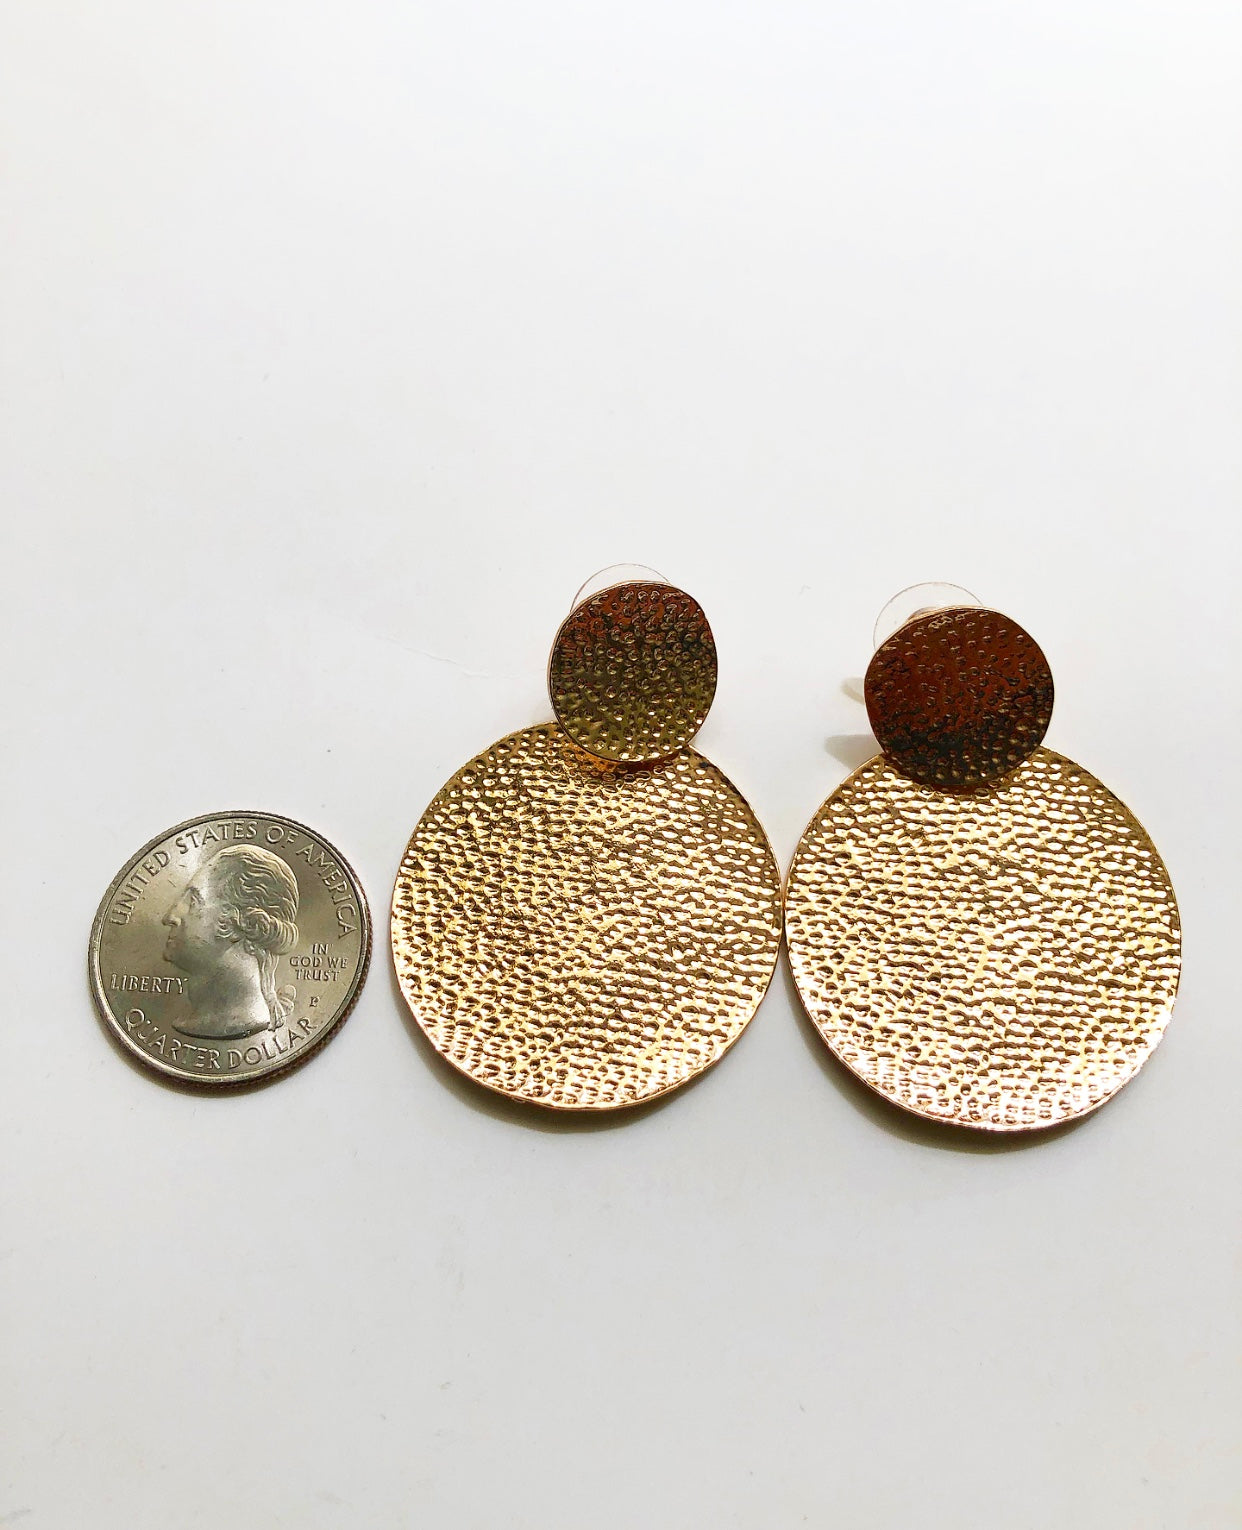 In My Element Earrings shown next to a quarter for size comparison.